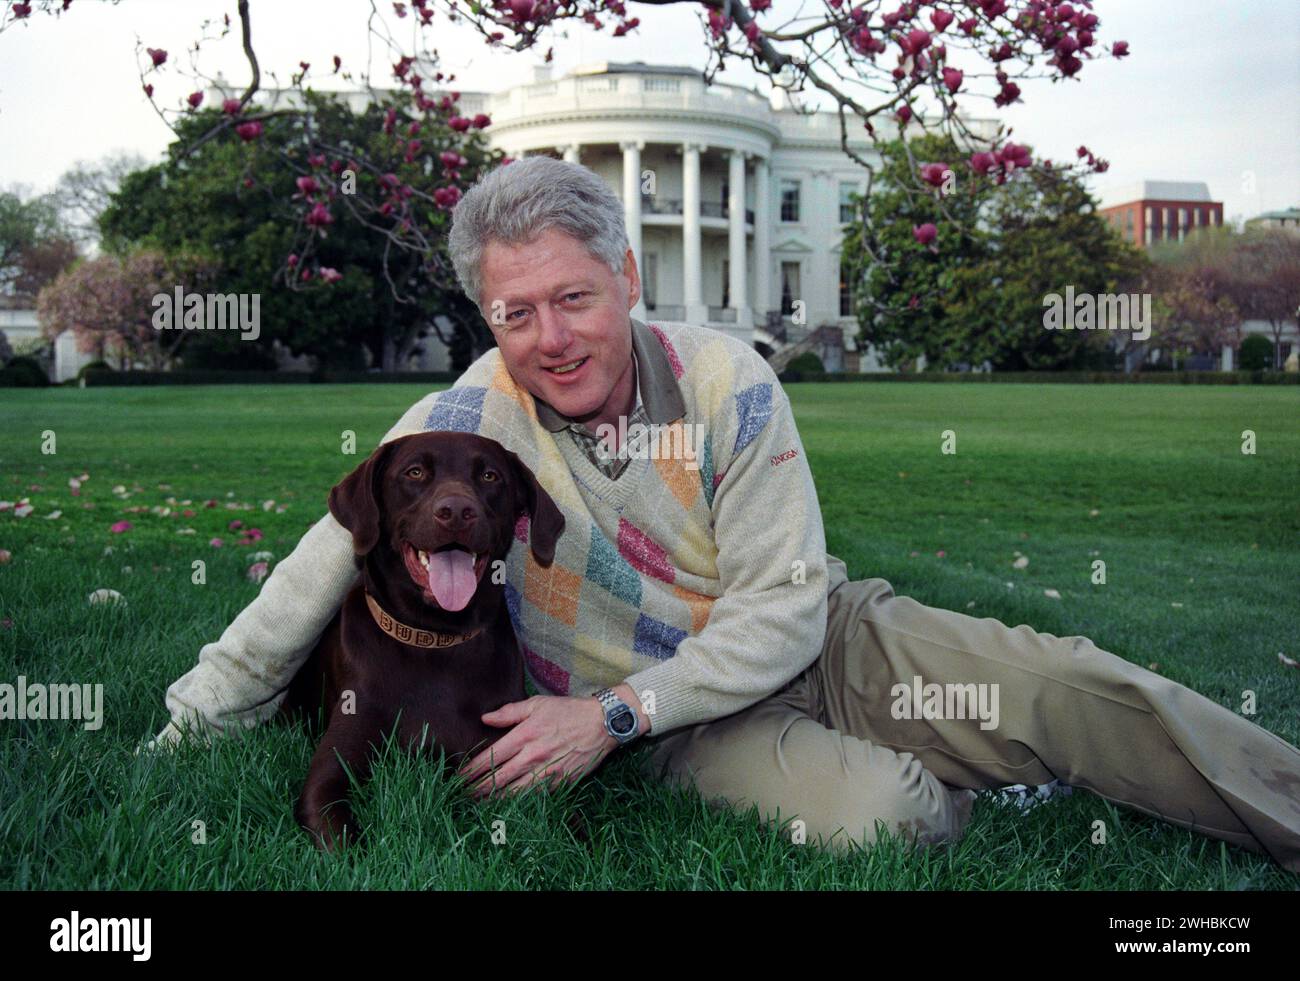 President Bill Clinton poses with his dog Buddy for a portrait photo on The White House South Lawn, 1999 Stock Photo